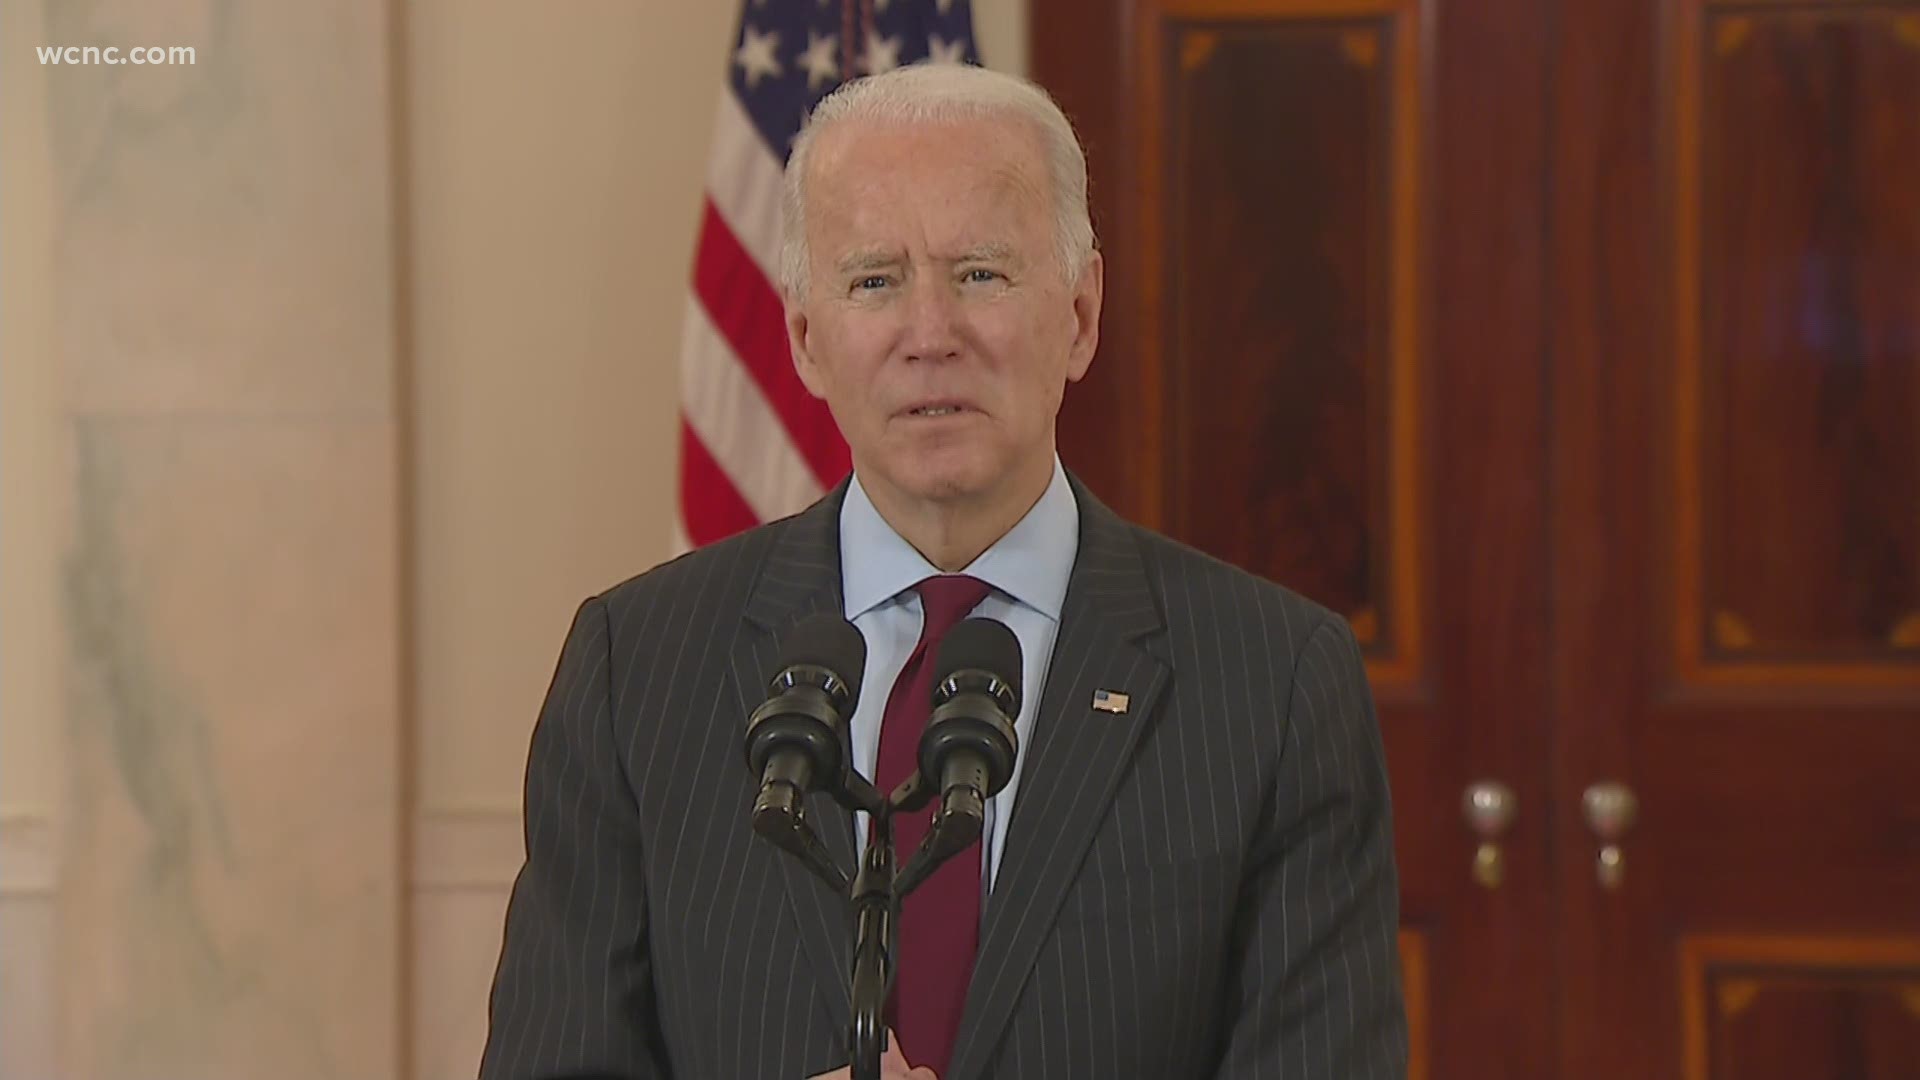 President Biden addressed the nation on Monday afternoon.